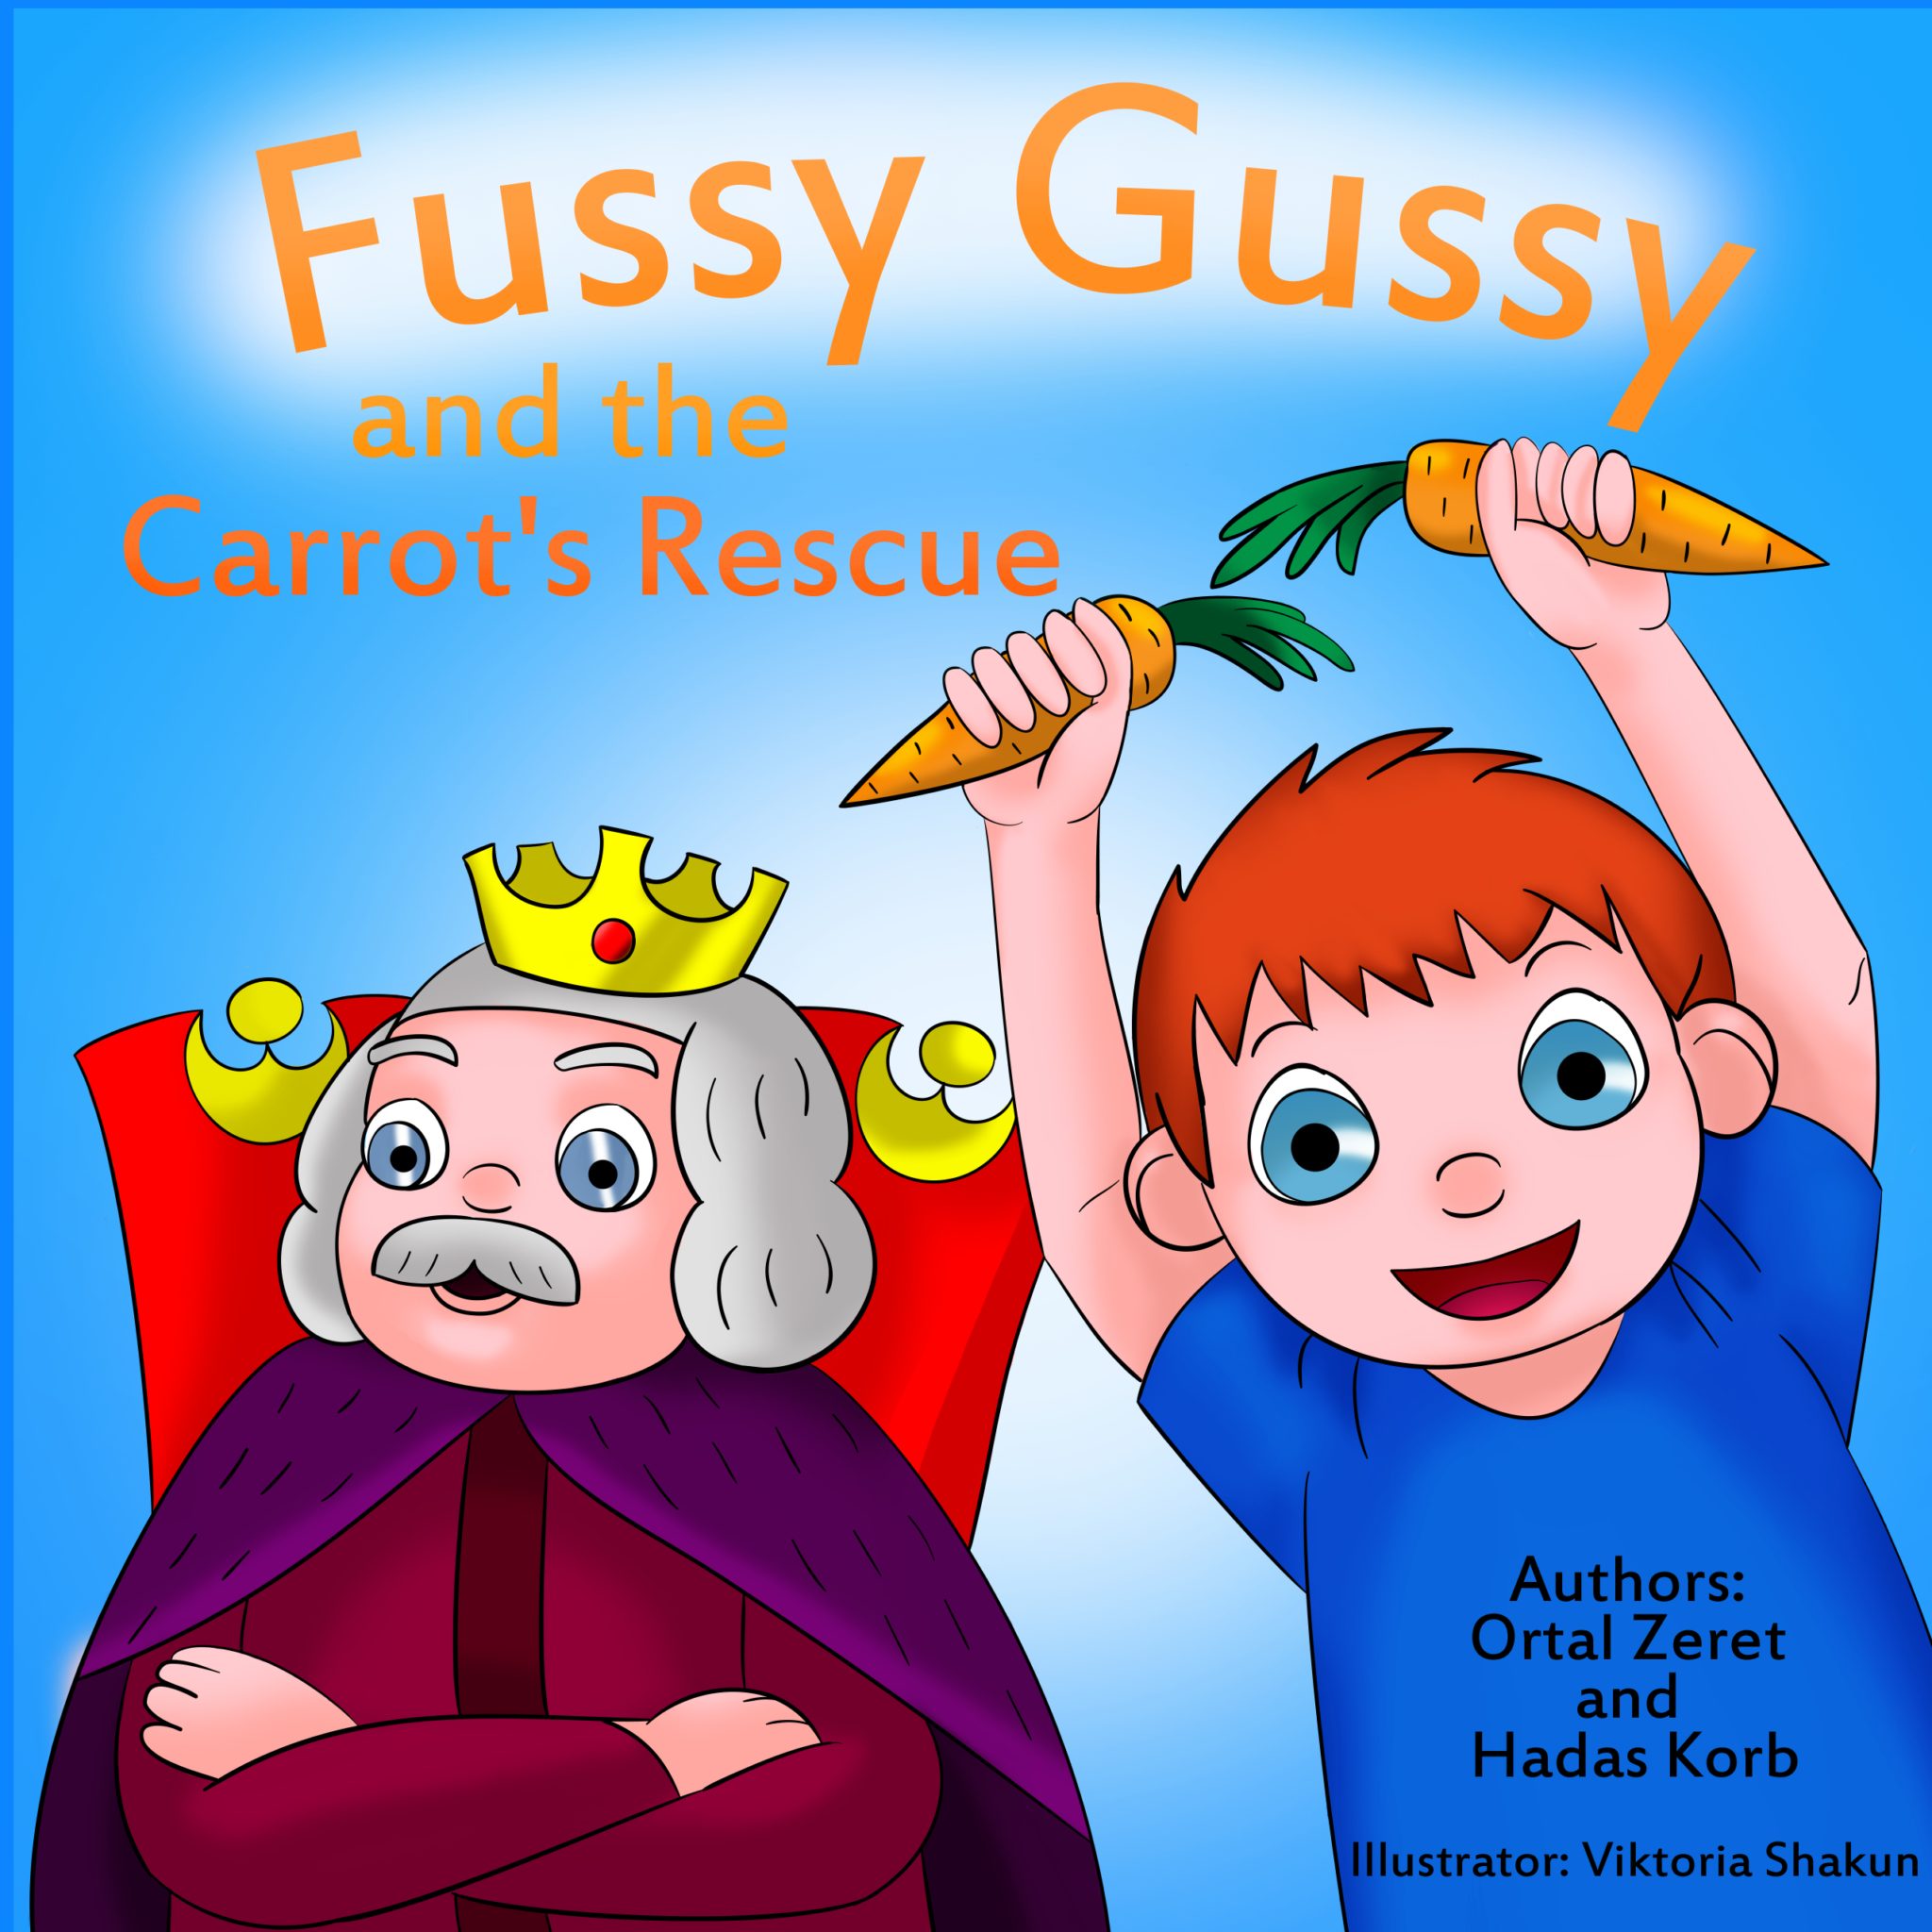 FREE: Fussy Gussy and the Carrot Rescue by Hadas Korb and Ortal Zeret